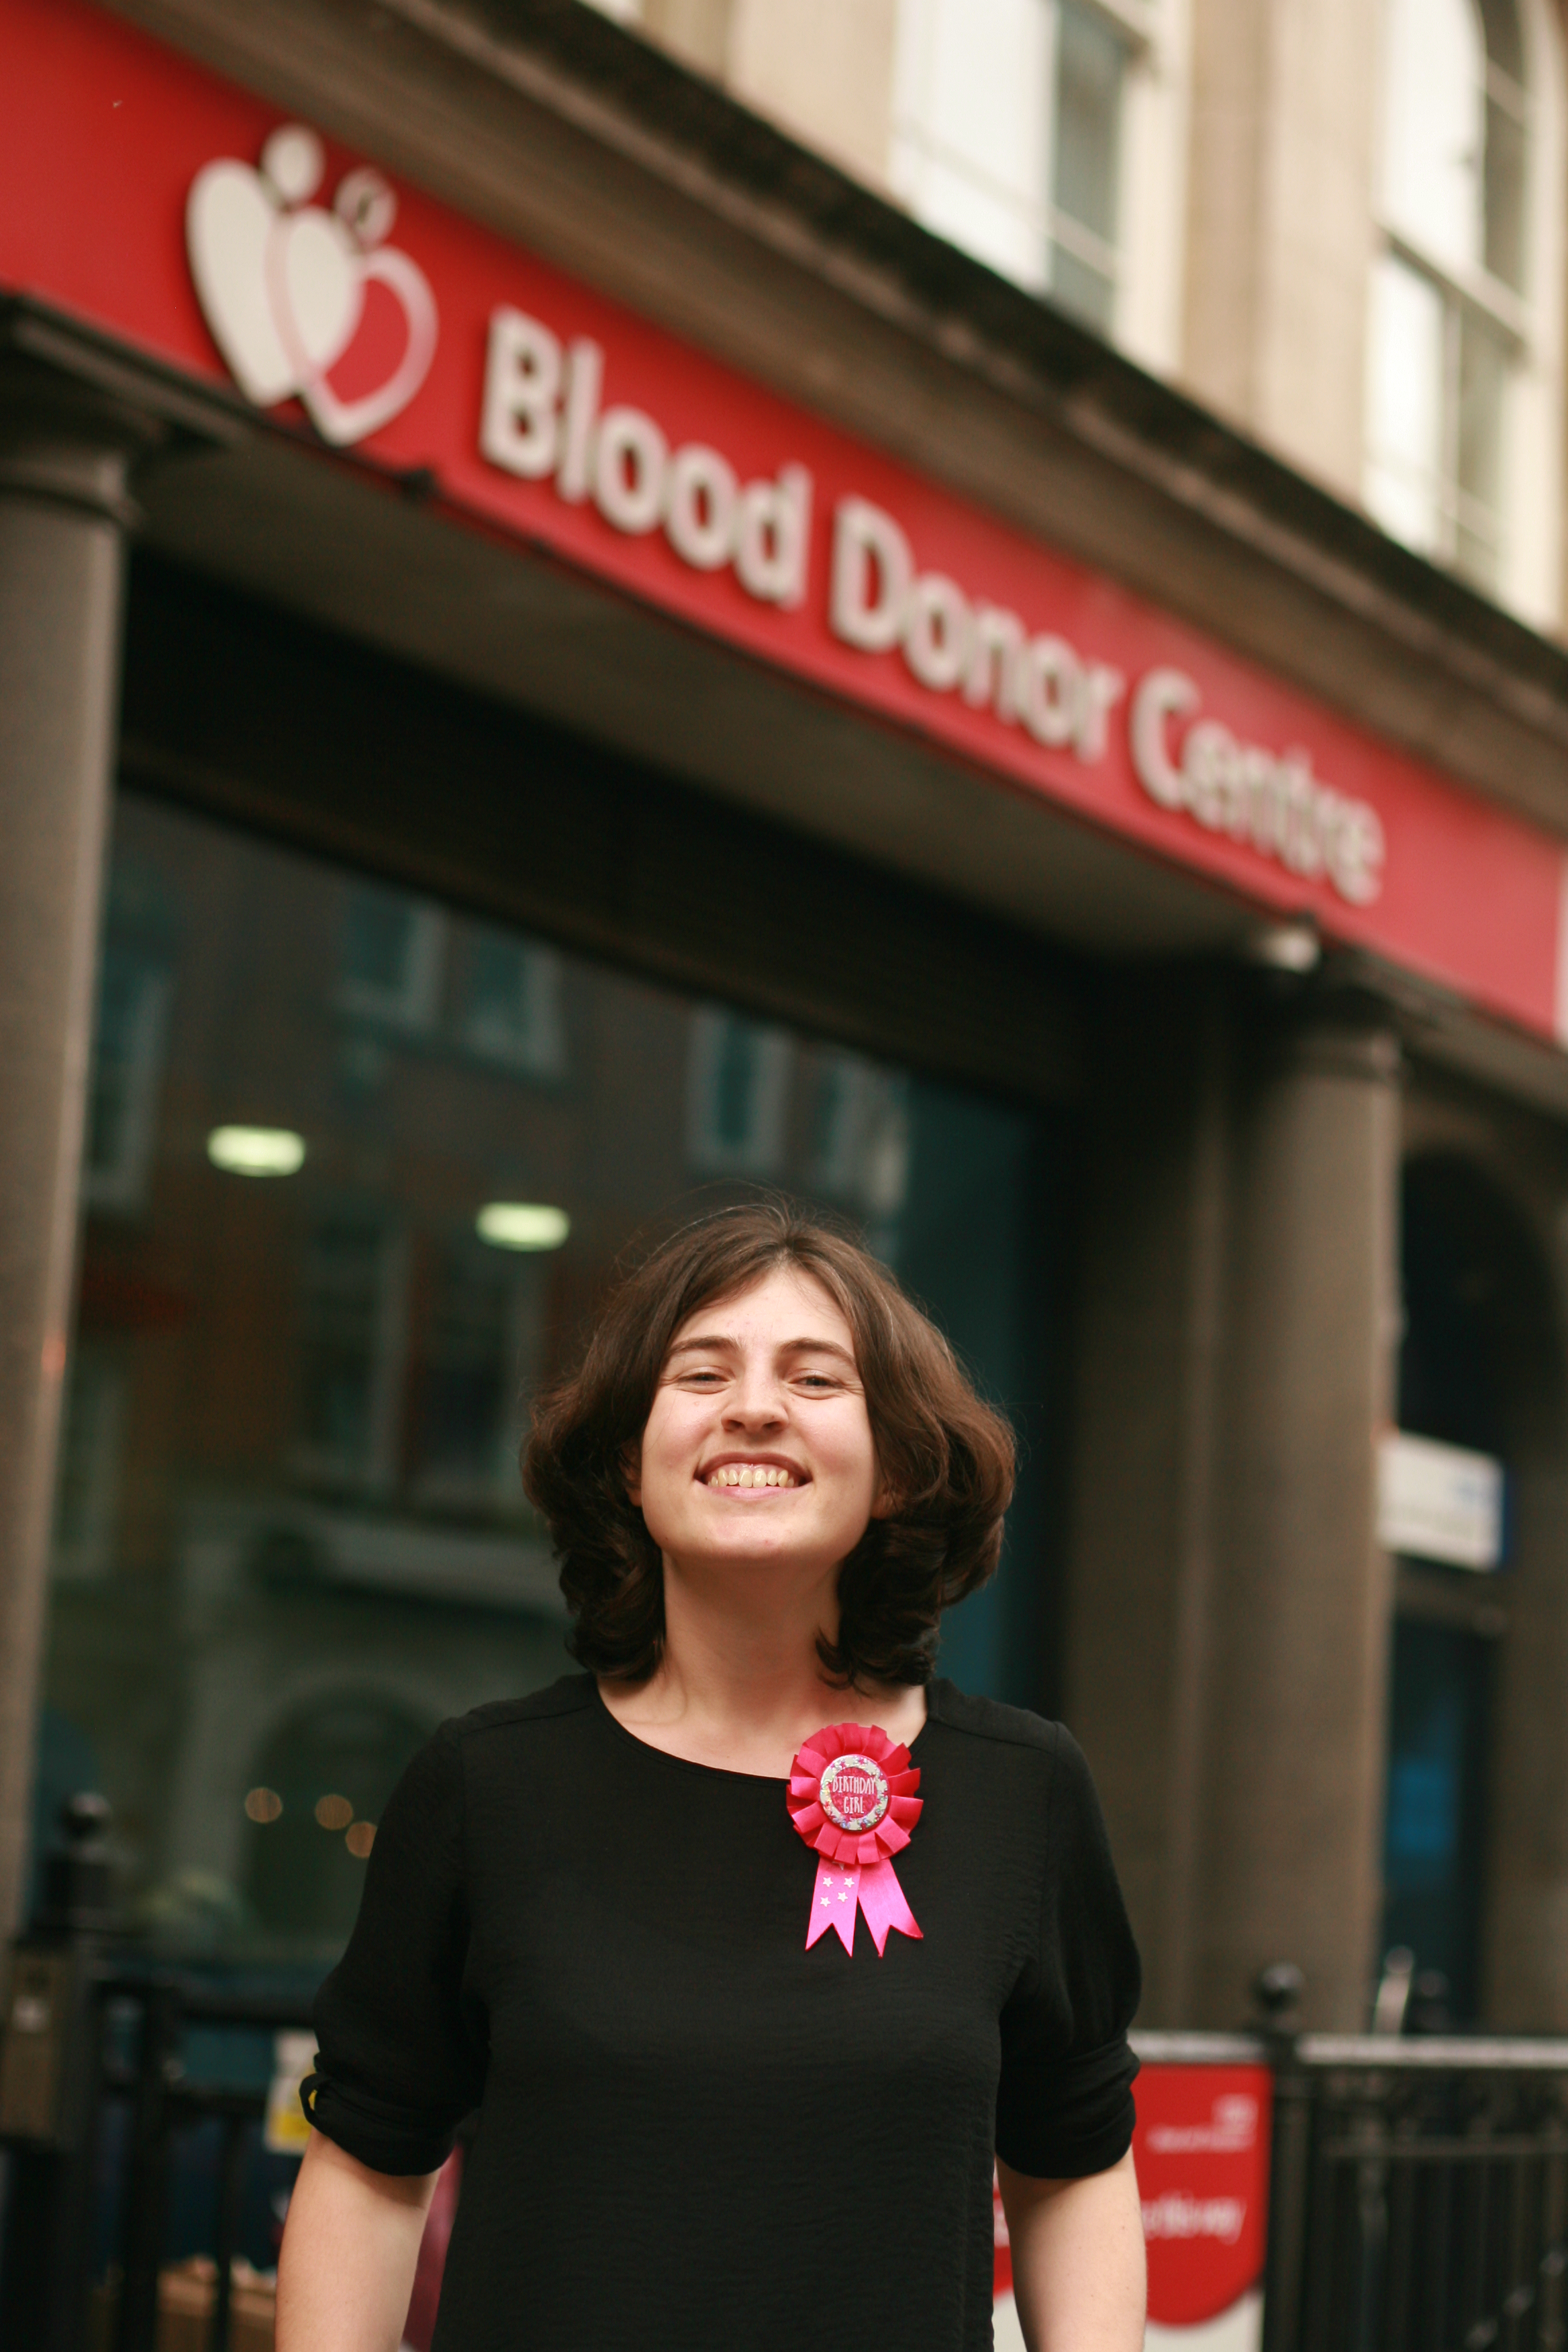 Lucia Chaplin outside the West End Donor Centre